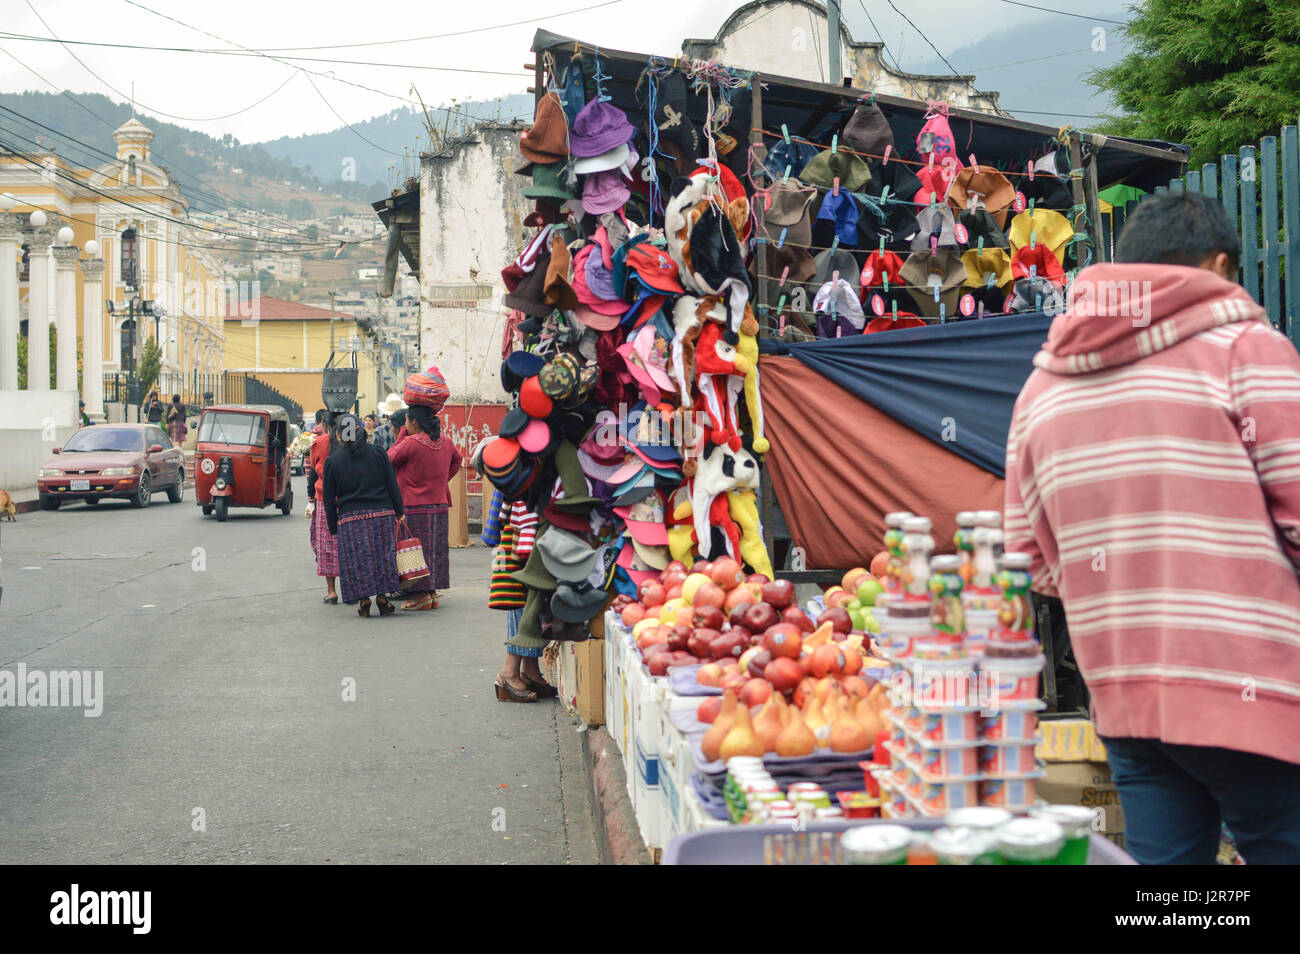 Totonicapan, Guatemala - February 10, 2015: Maya people and cars are seen in the streets of a small colonial town of Totonicapan in Guatemala on a bus Stock Photo